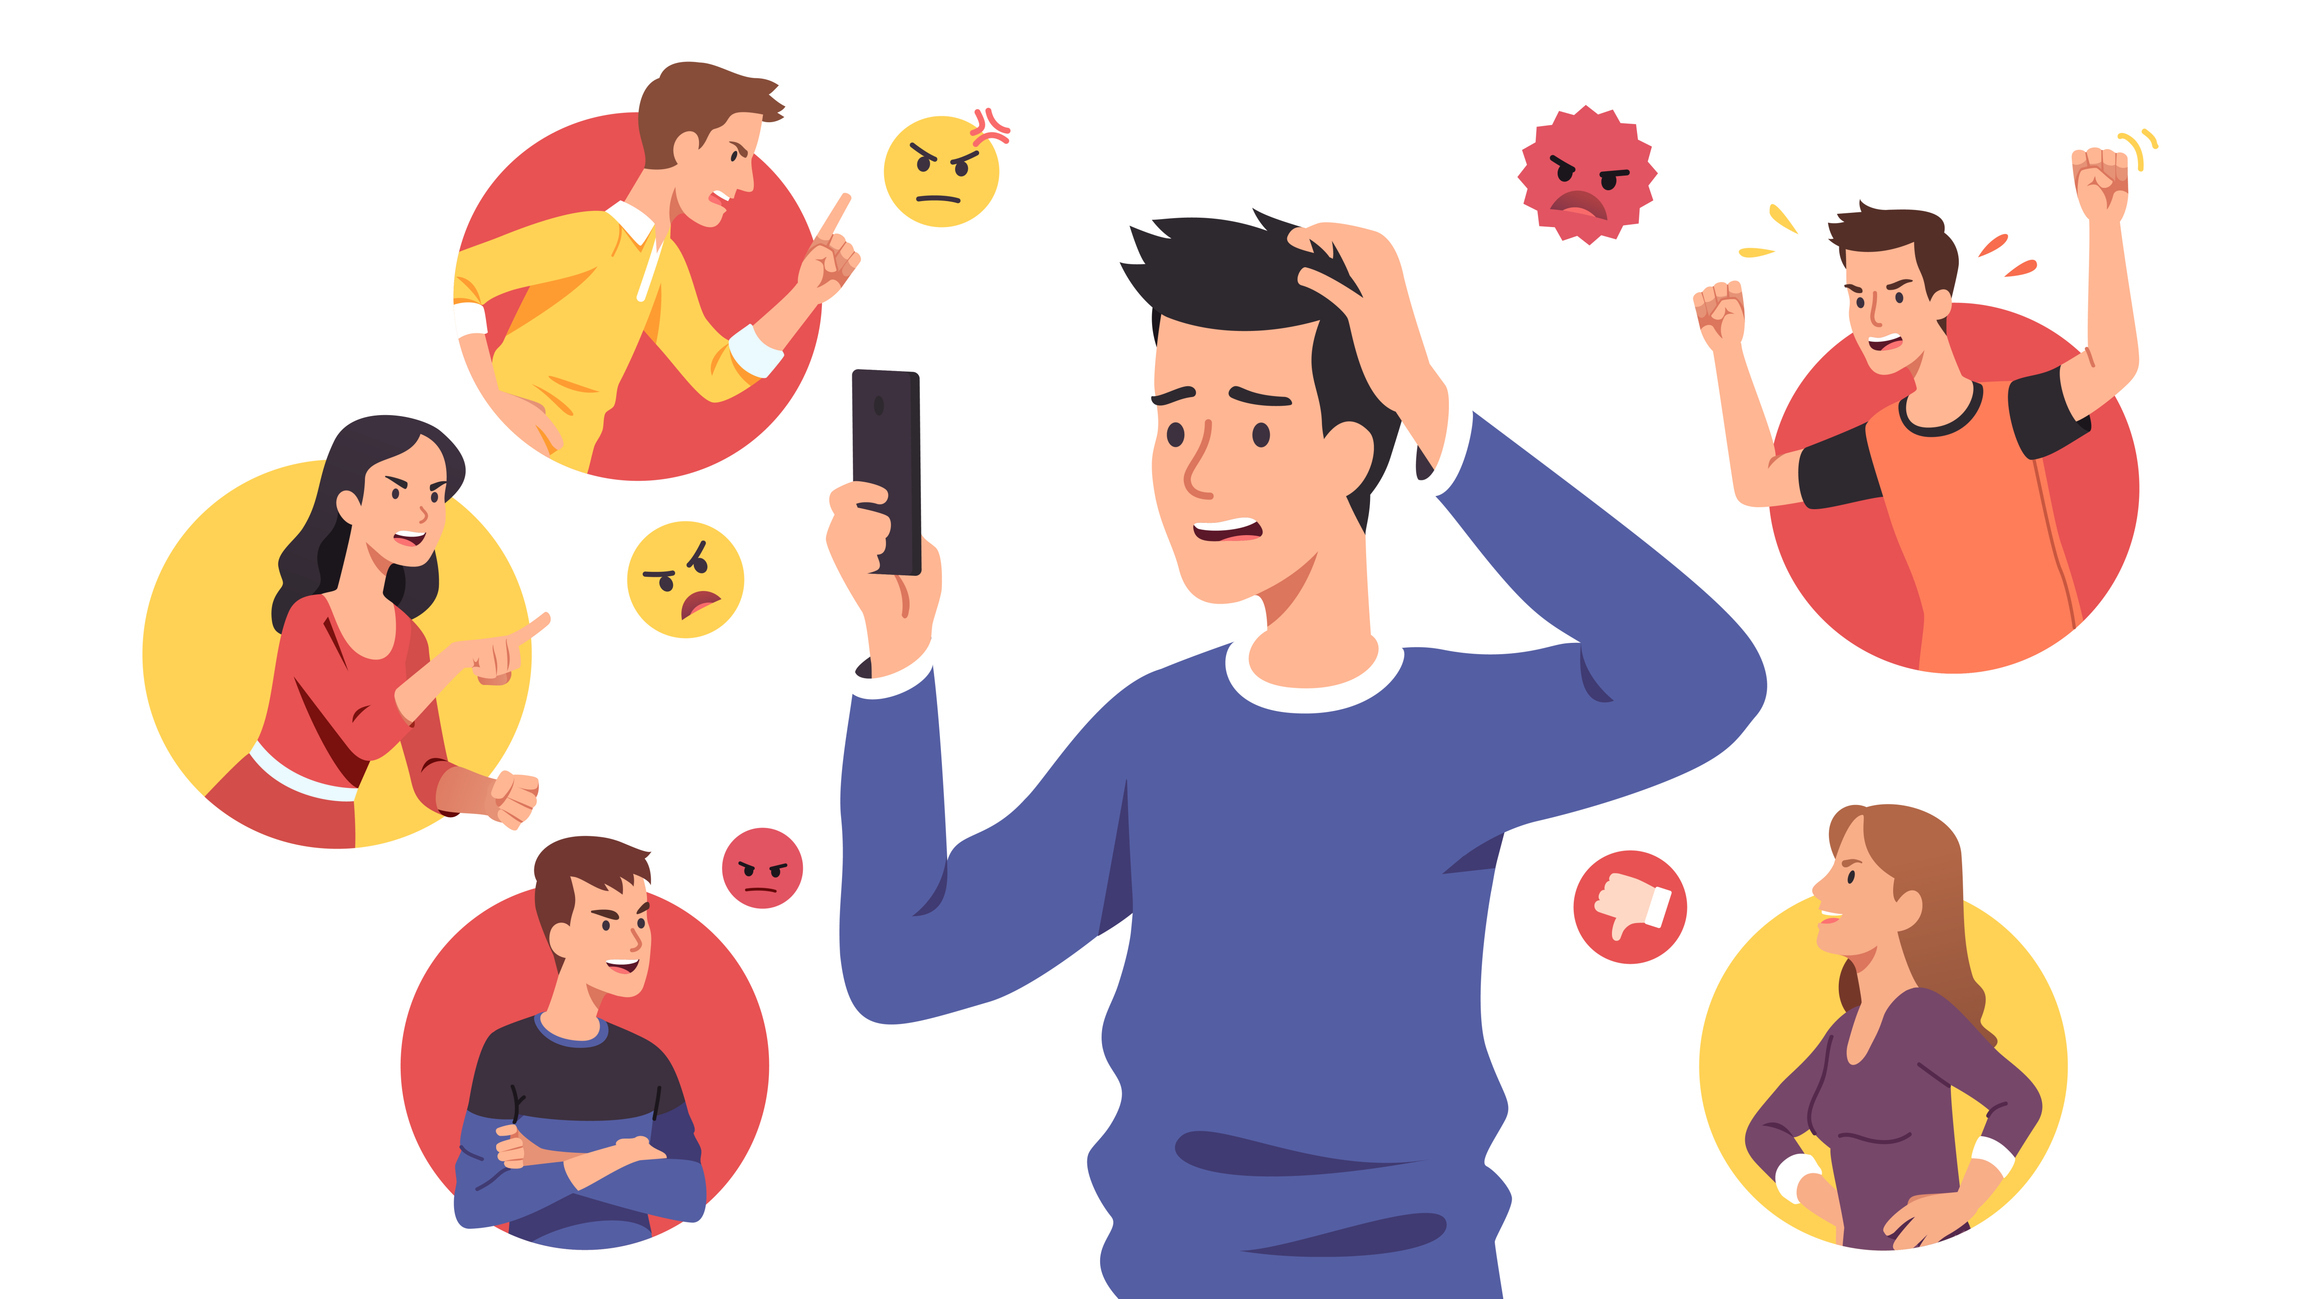 Person looking at phone surrounded by illustrated bubbles of various emotional reactions